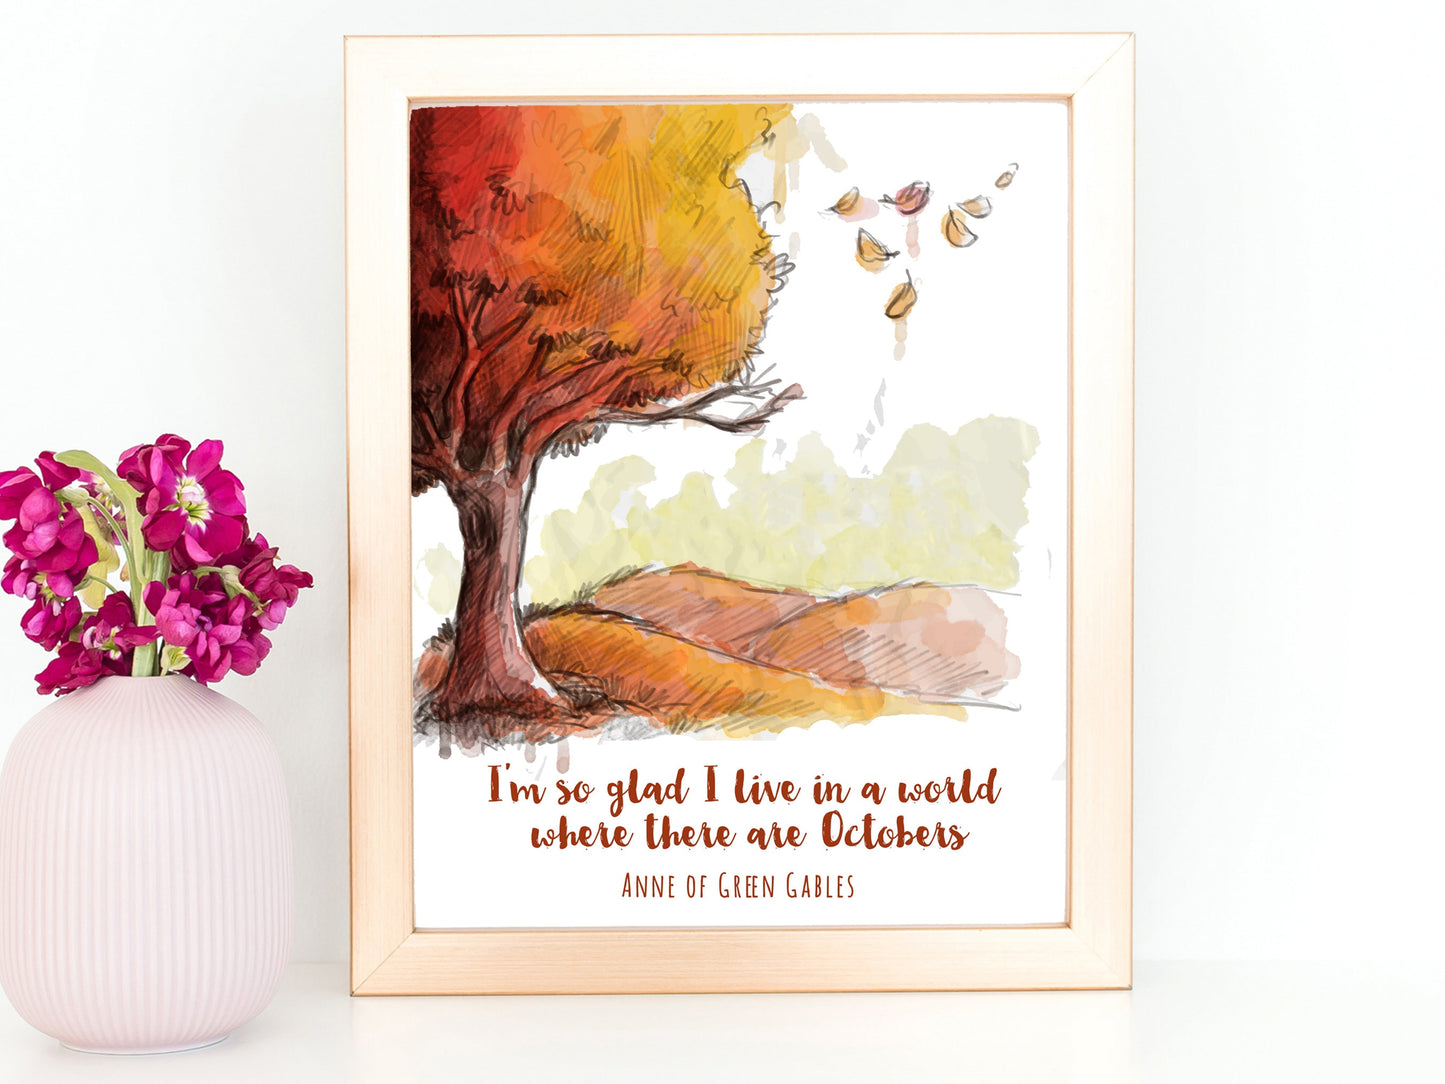 Anne of Green Gables World with Octobers Watercolor Art Print